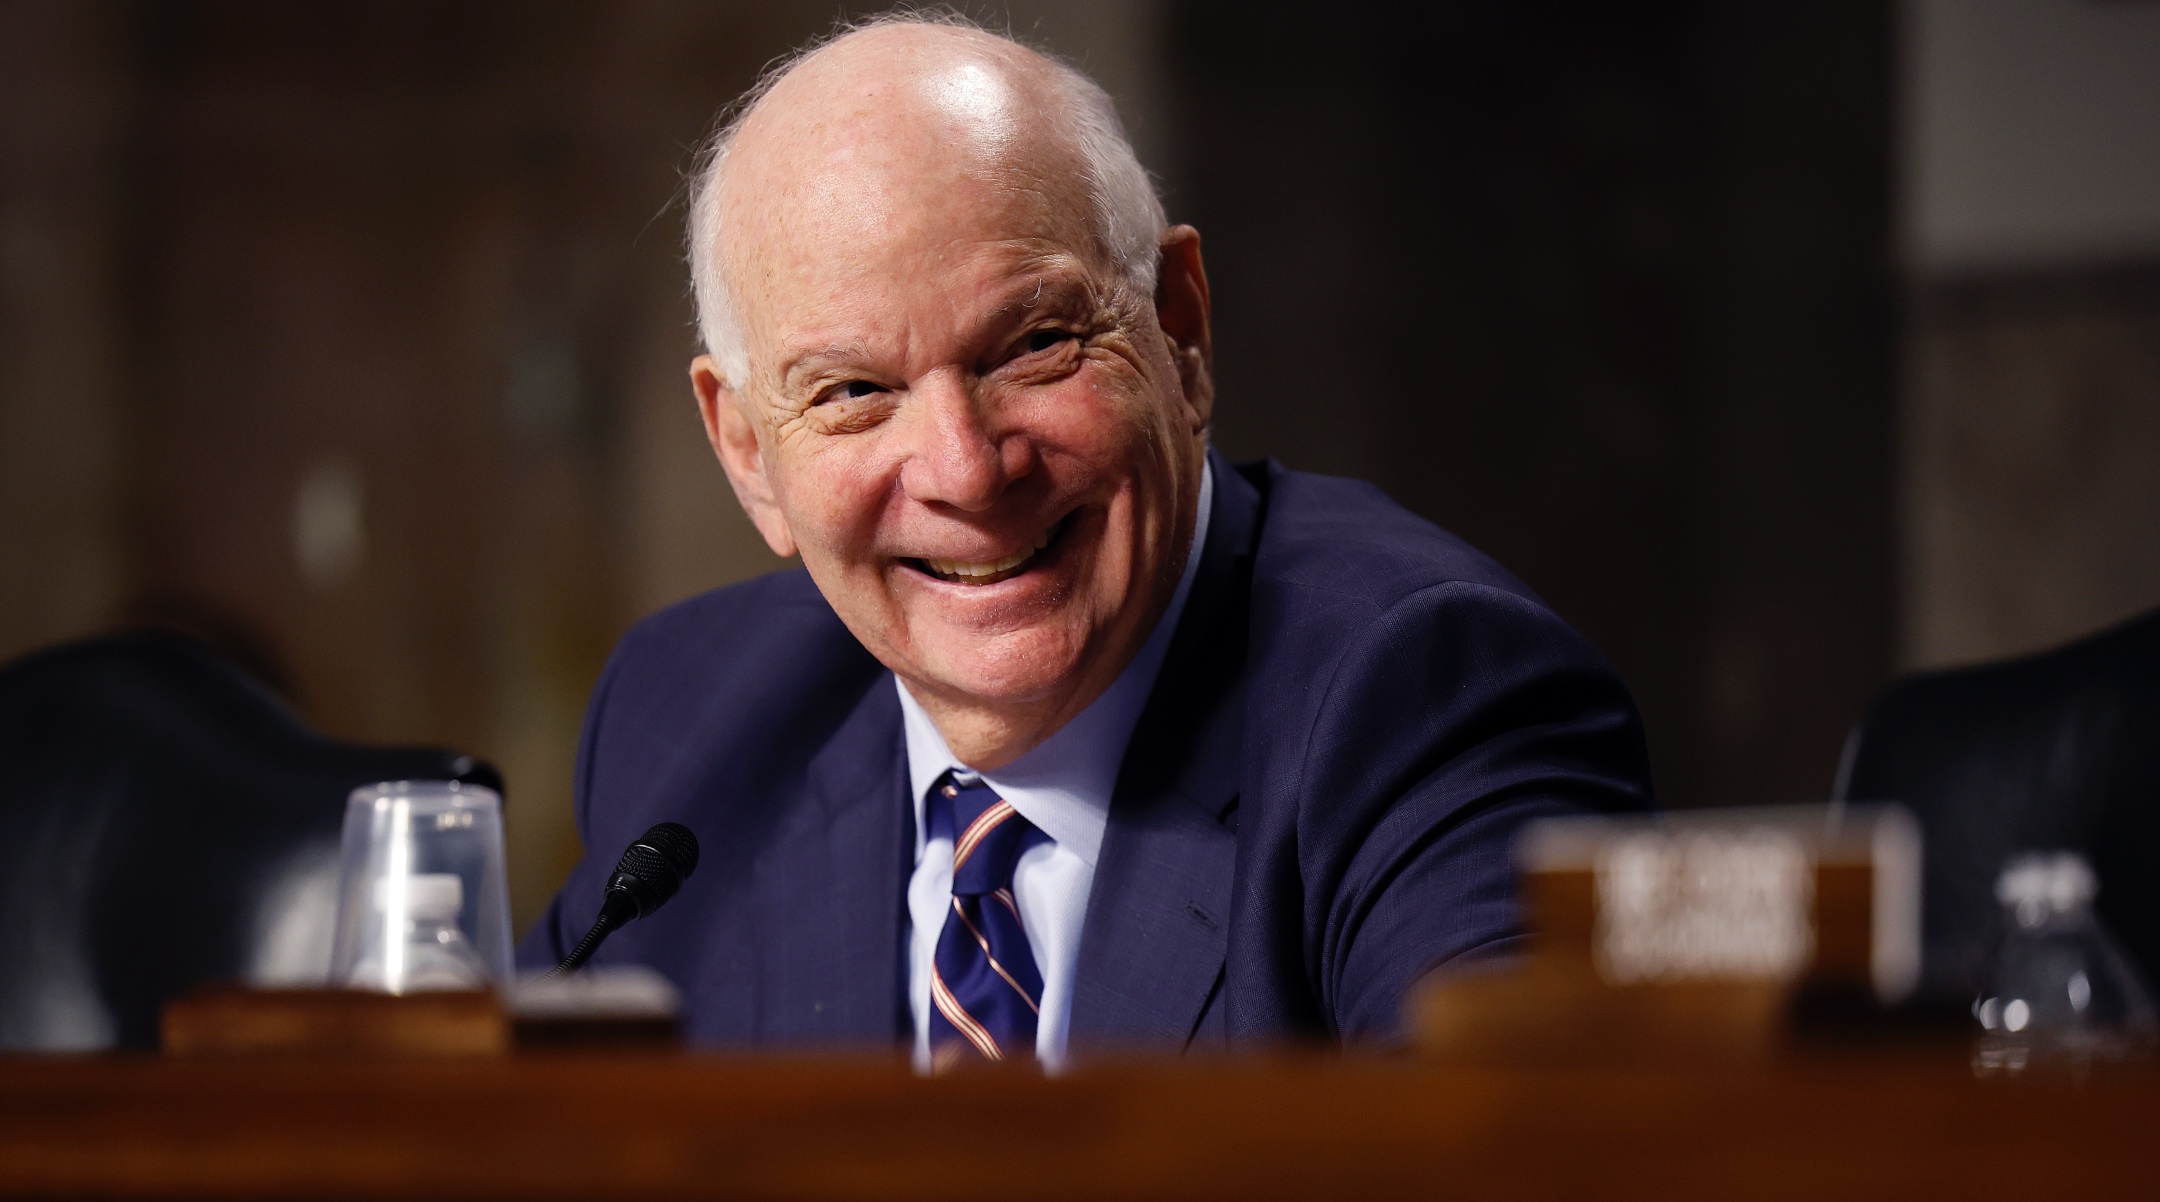 U.S. Helsinki Commission Chairman Sen. Ben Cardin, a Maryland Democrat, presides over a hearing about the recent rise in antisemitism and its threat to democracy in the Dirksen Senate Office Building on Capitol Hill, Dec. 13, 2022. (Chip Somodevilla/Getty Images)